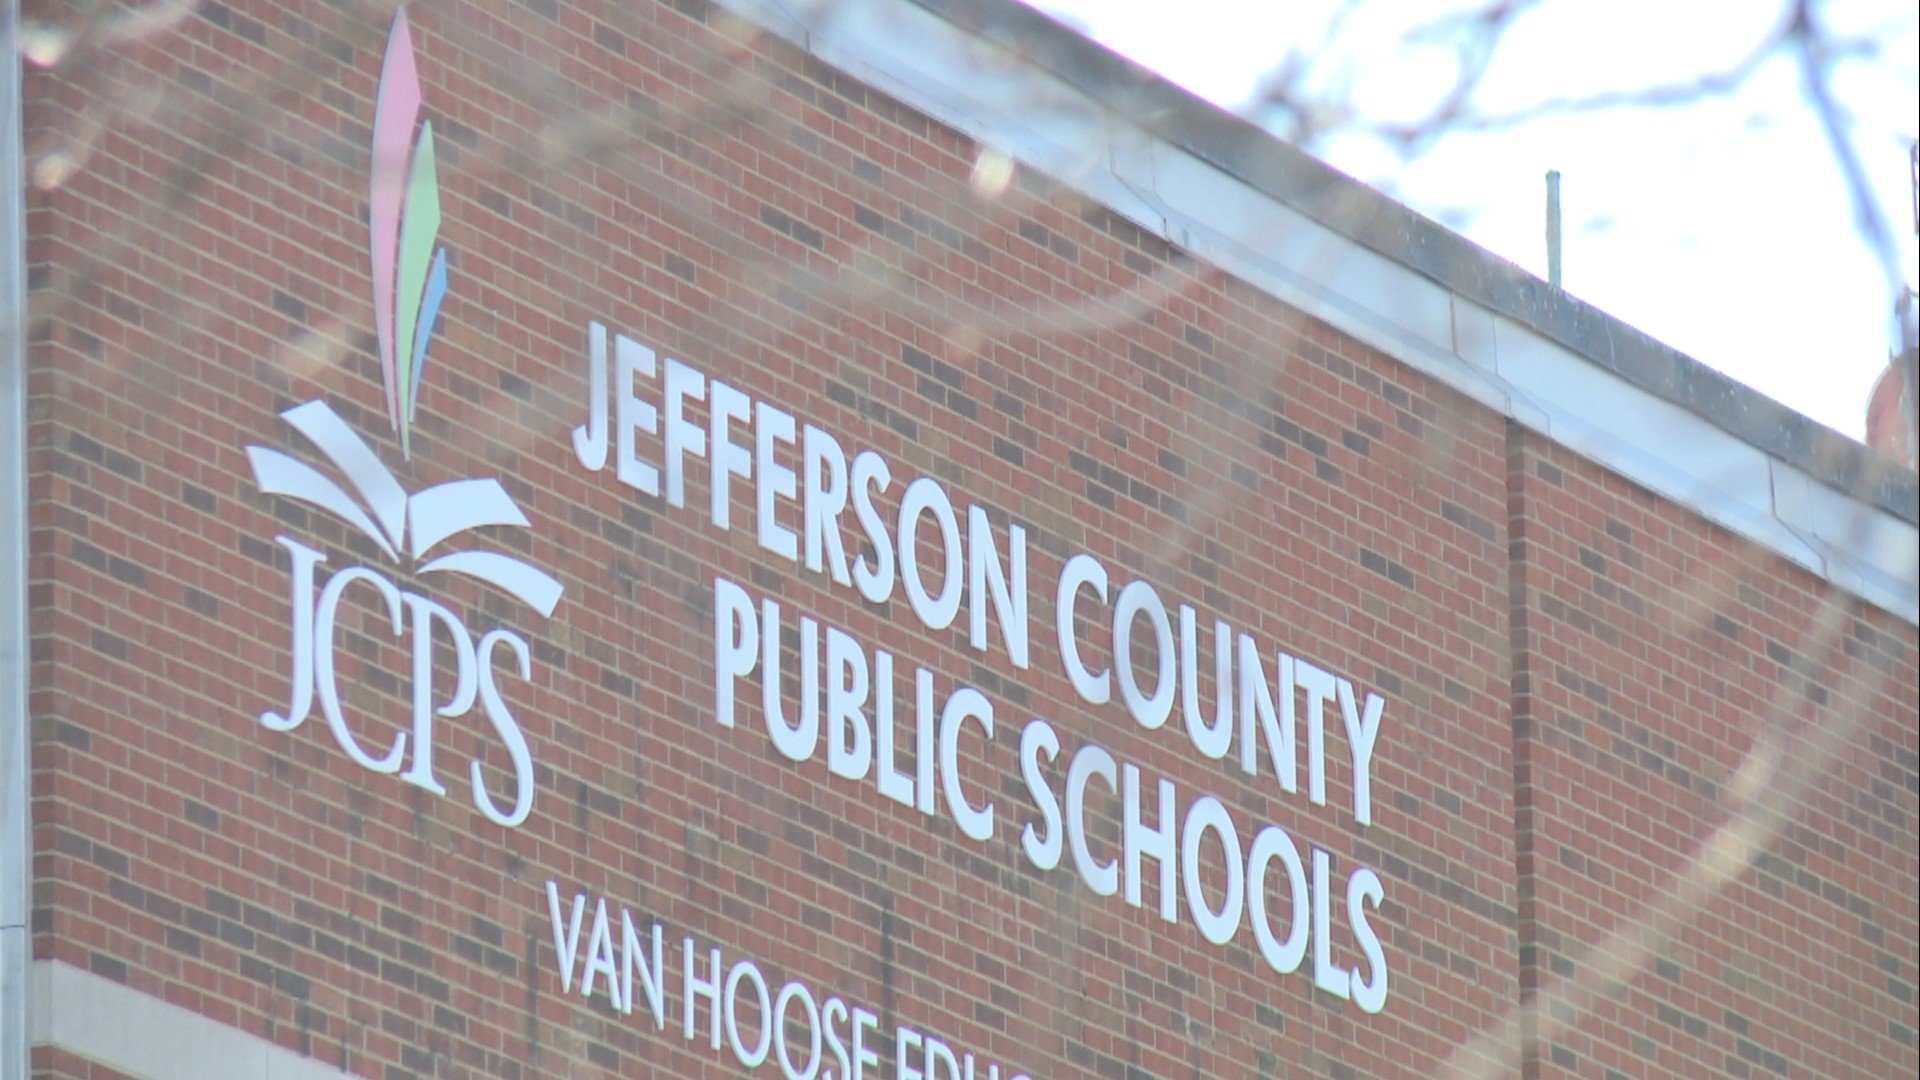 The JCPS Job Fair will be Tuesday, March 26 from 10 a.m. to 2 p.m.